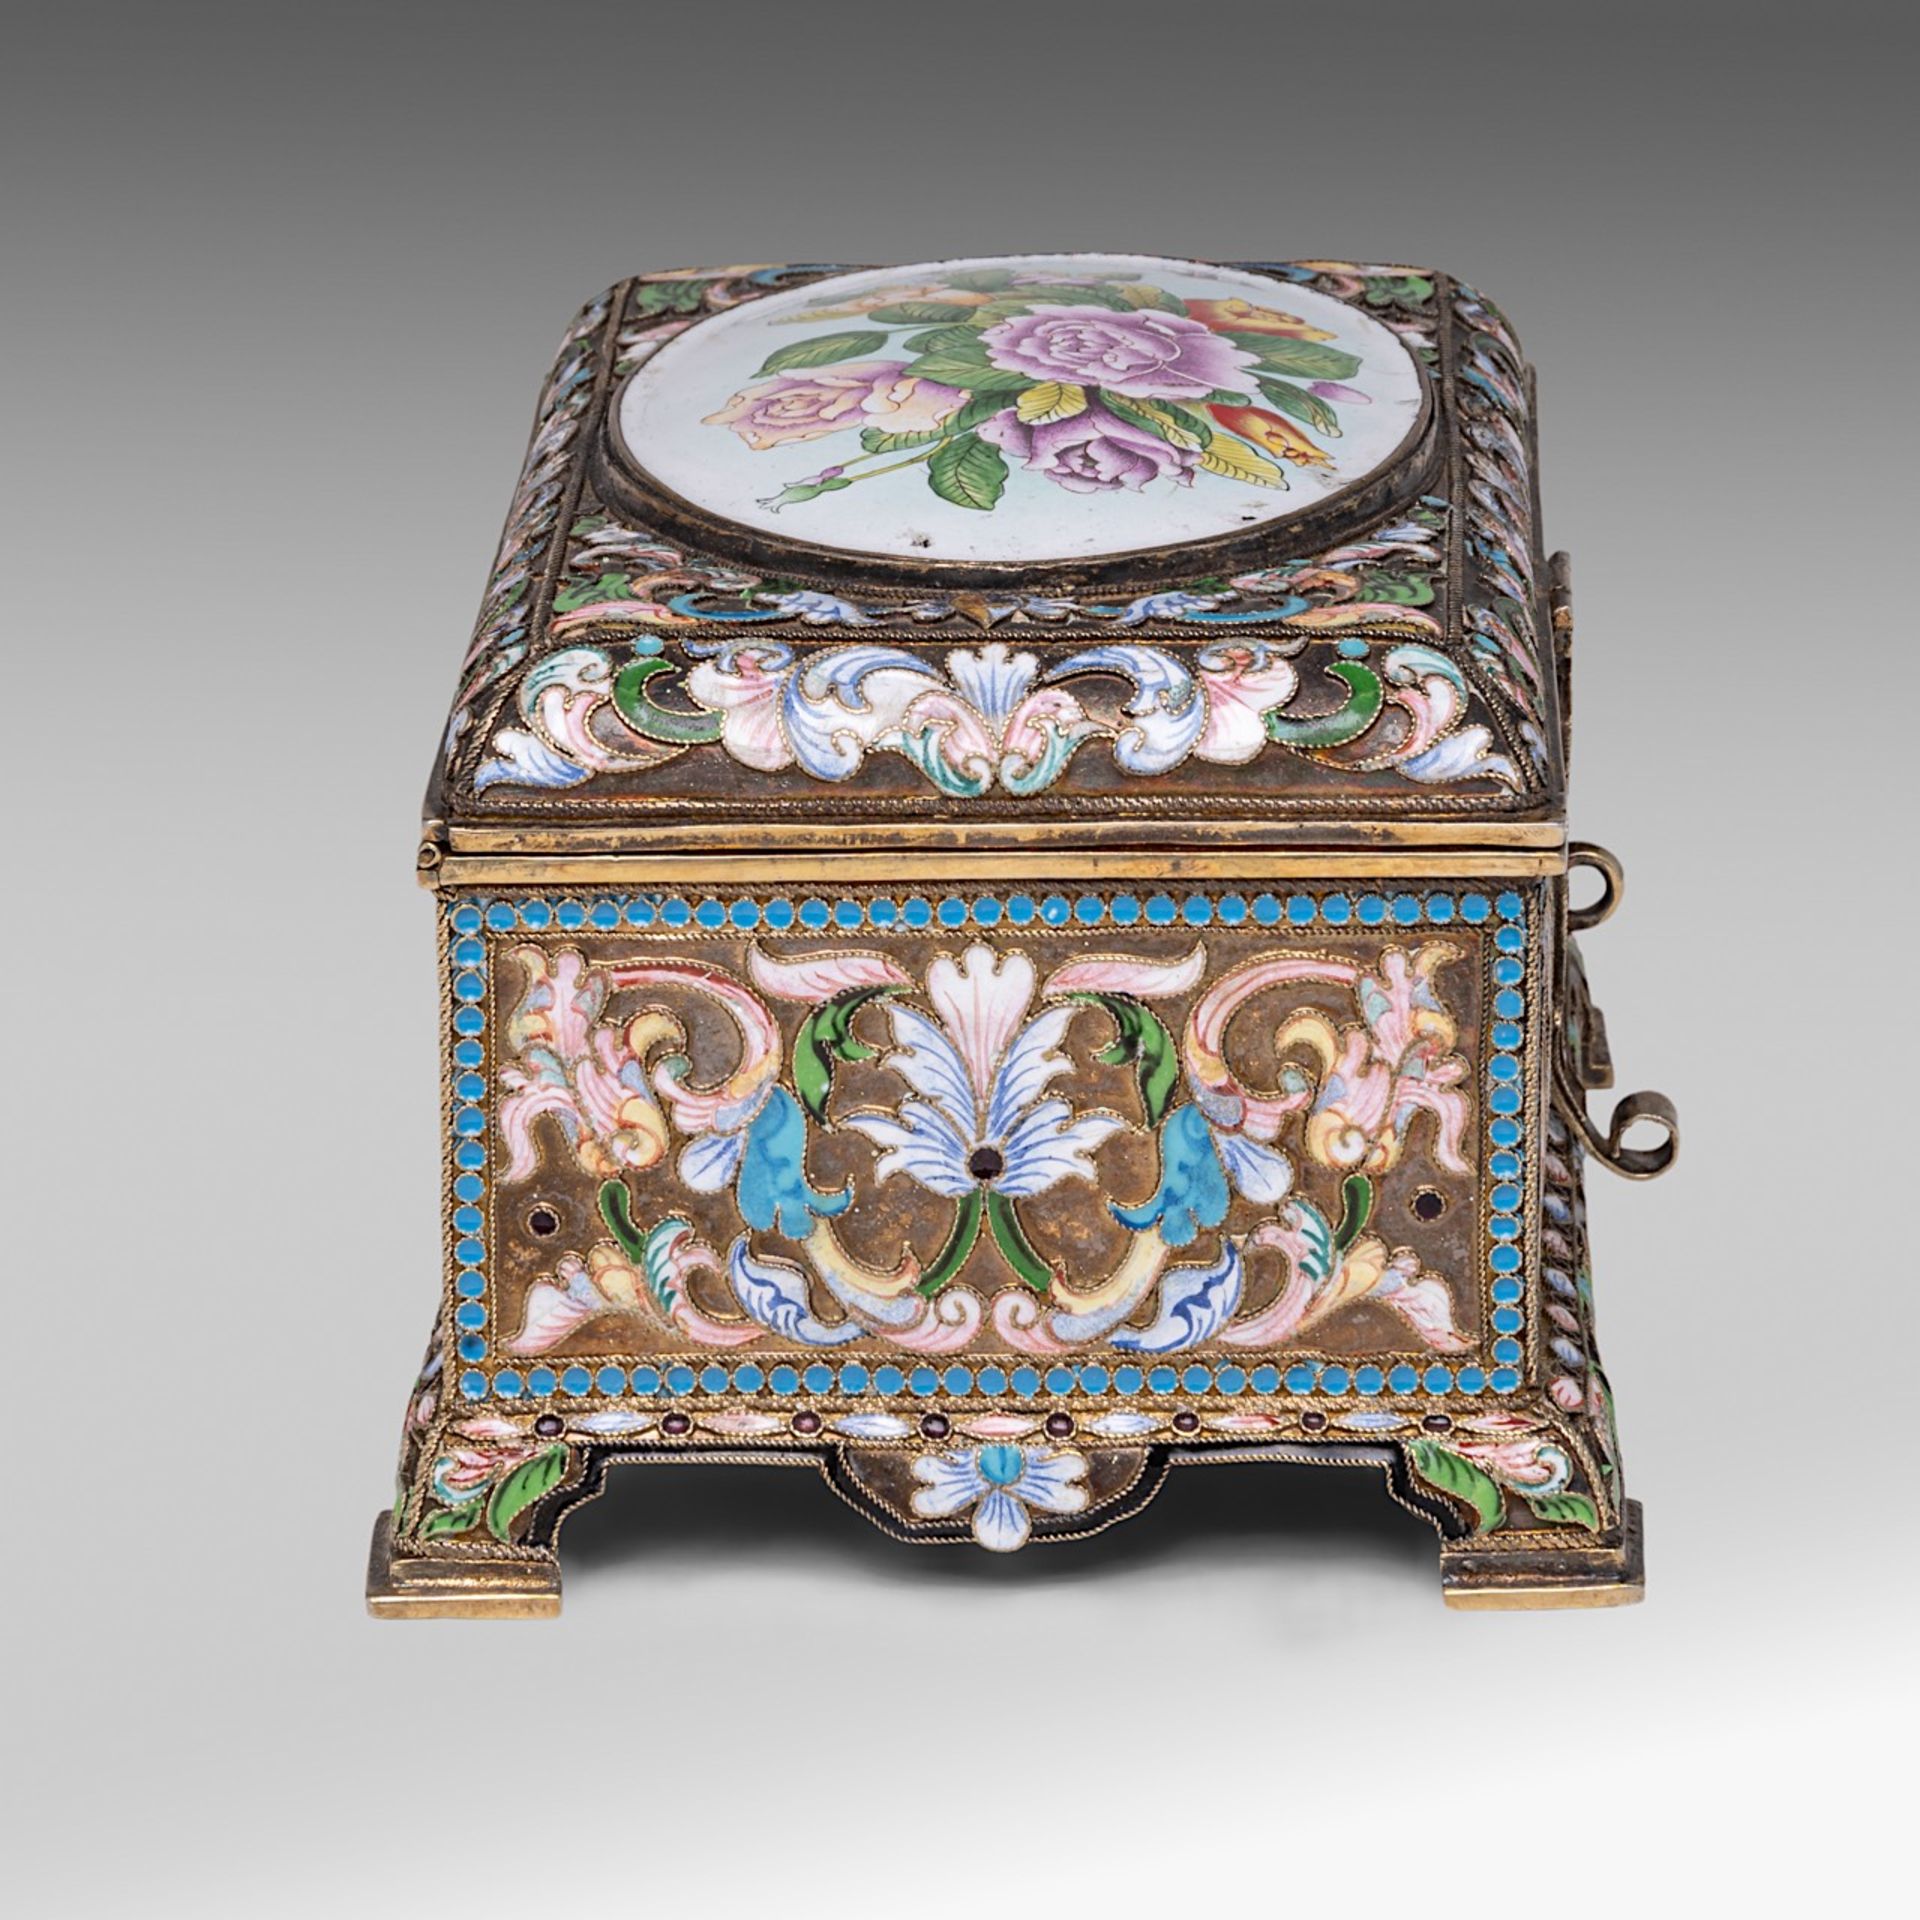 A Russian silver and enamel floral decorated jewellery box, hallmarked 84 Zolotniki, H 8 - 15 - 10 c - Bild 5 aus 9